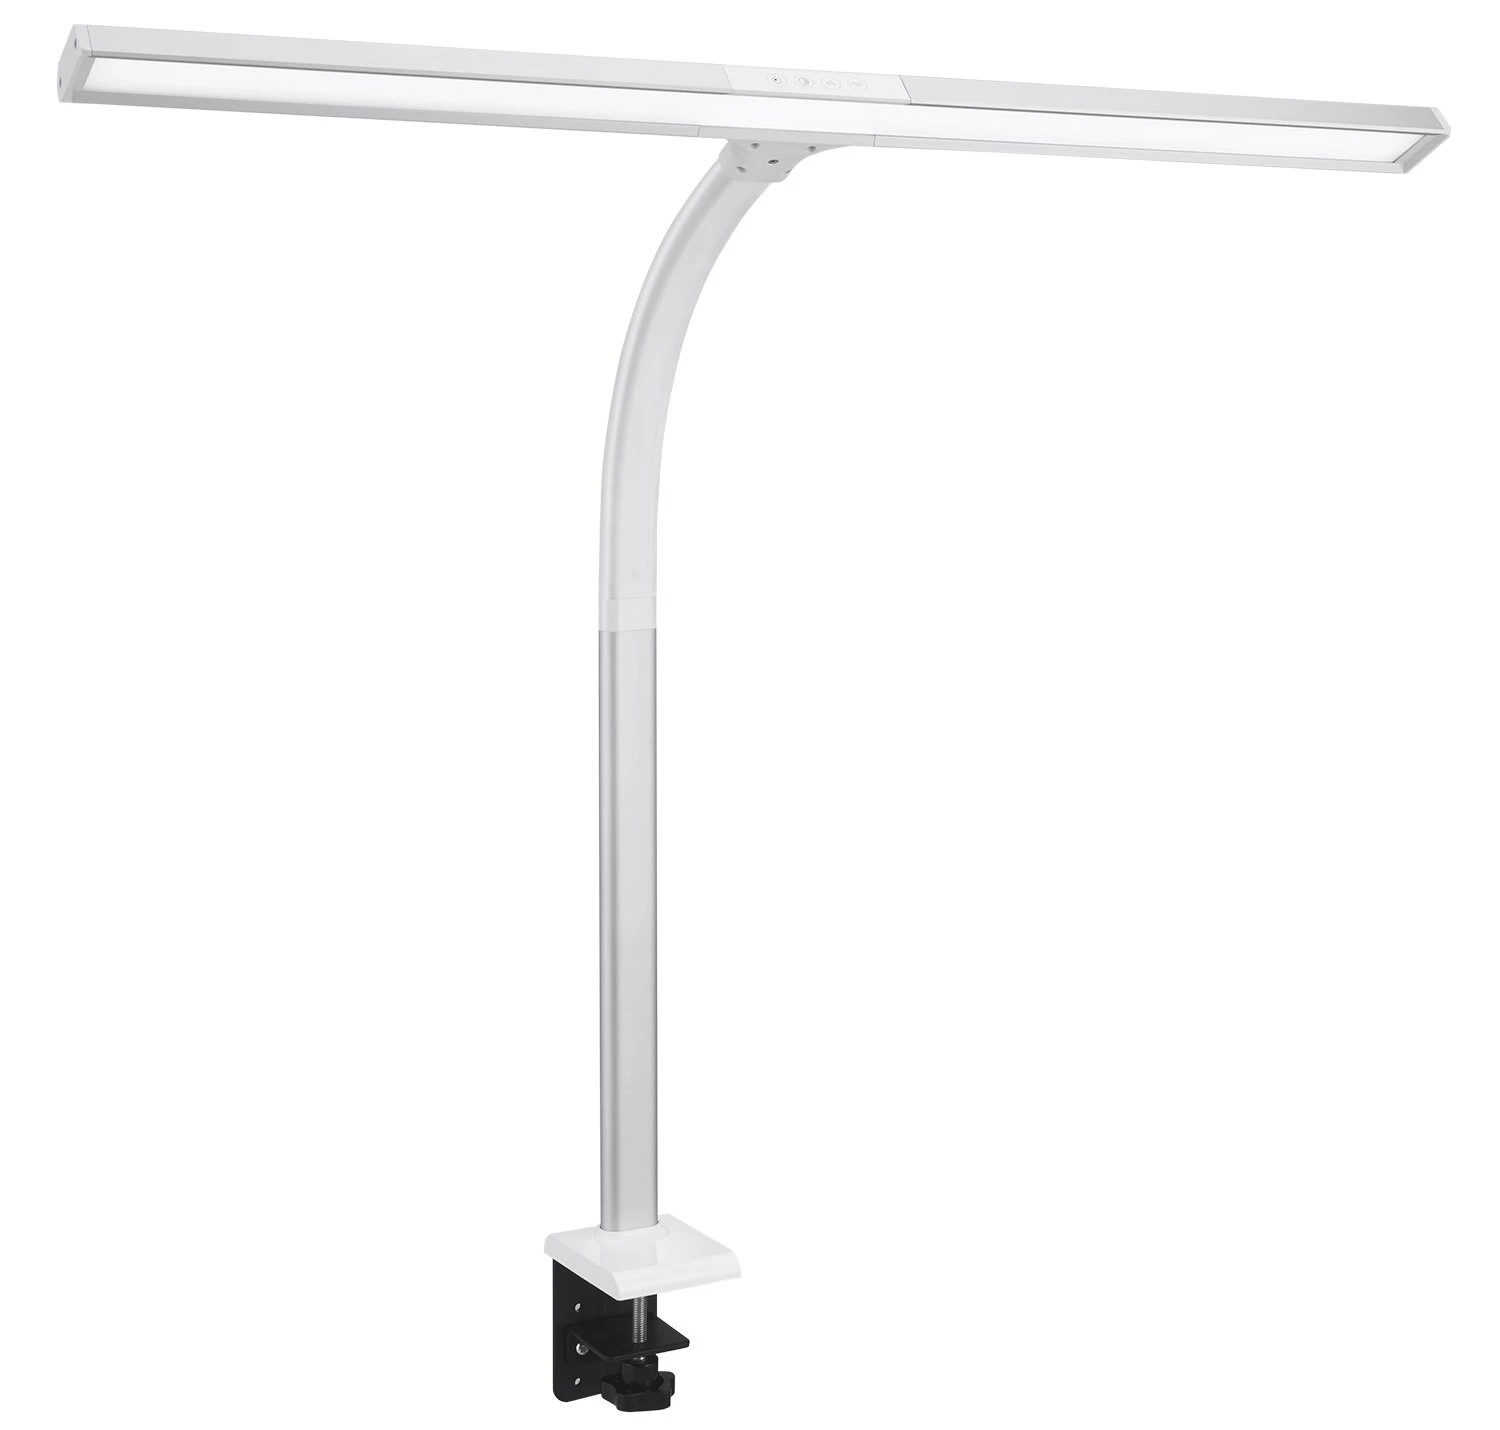 Metal Architect Swing Arm gooseneck led Desk Lamp Task Lamp with Clamp, Drafting Table Lamp for Electronics, laboratory jewelry